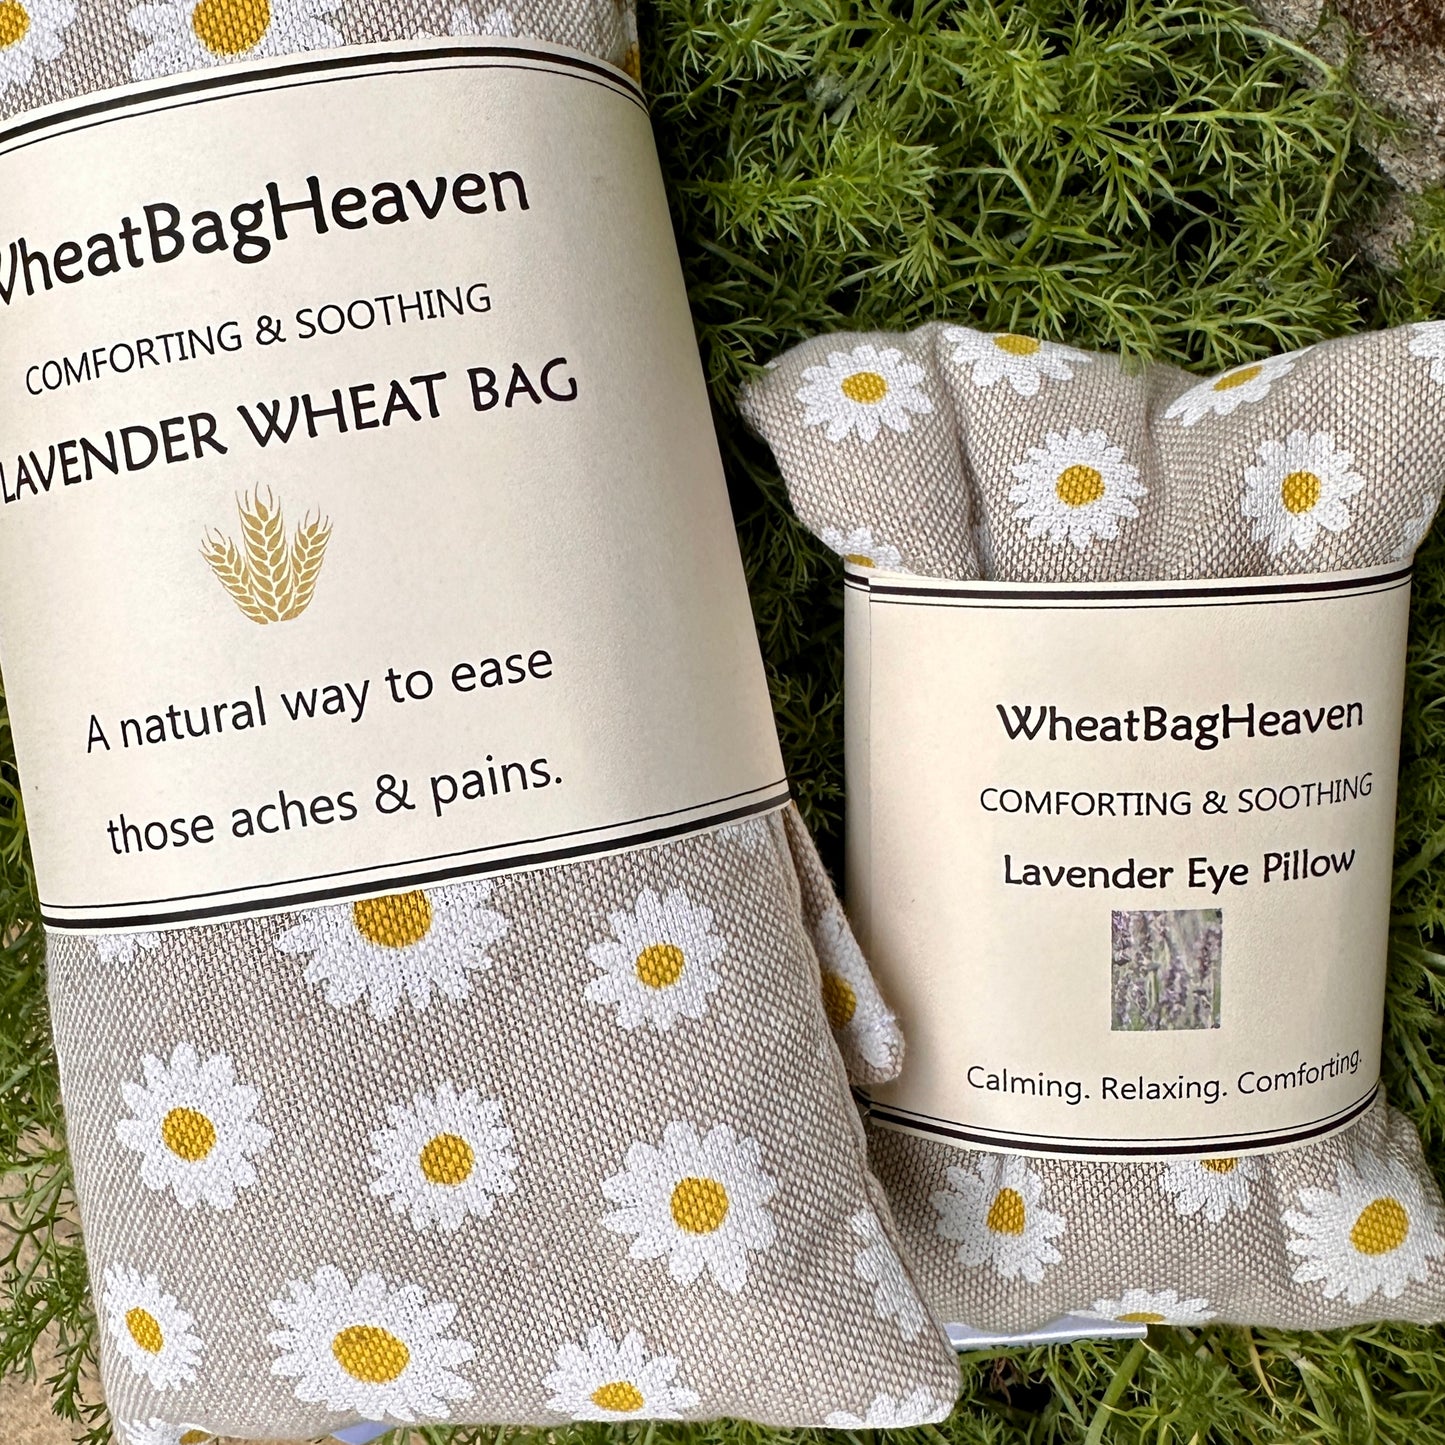 Daisy printed lavender wheat bags and eye pillows for comfort and relaxation. Handcrafted by wheatbagheaven.com both available individually and ready to post